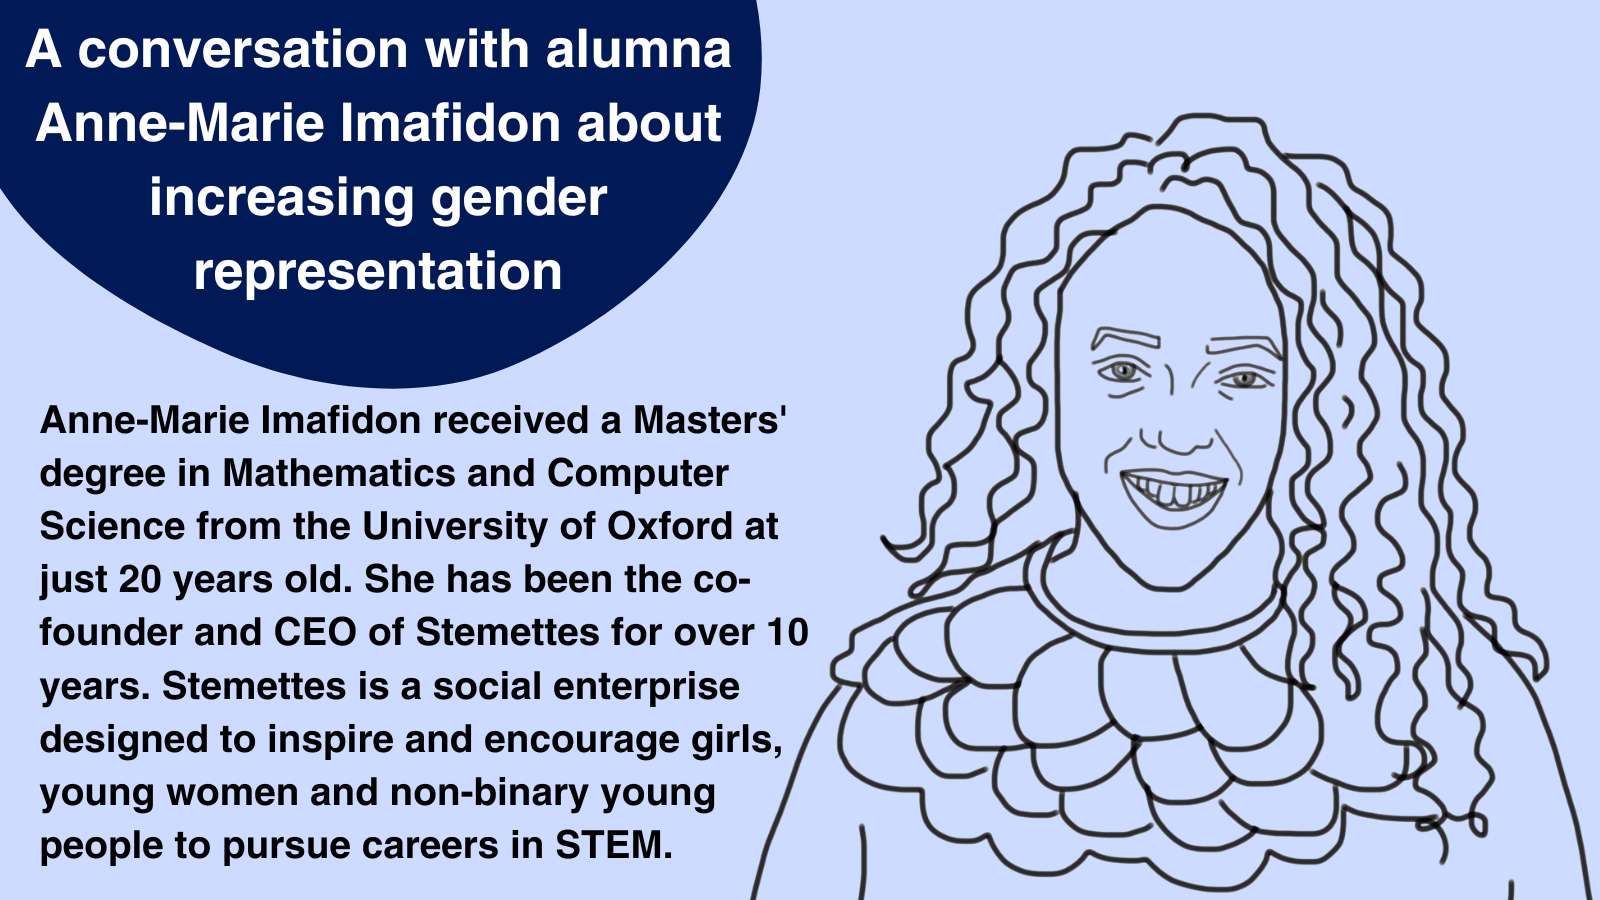 A conversation with alumna Anne-Marie Imafidon